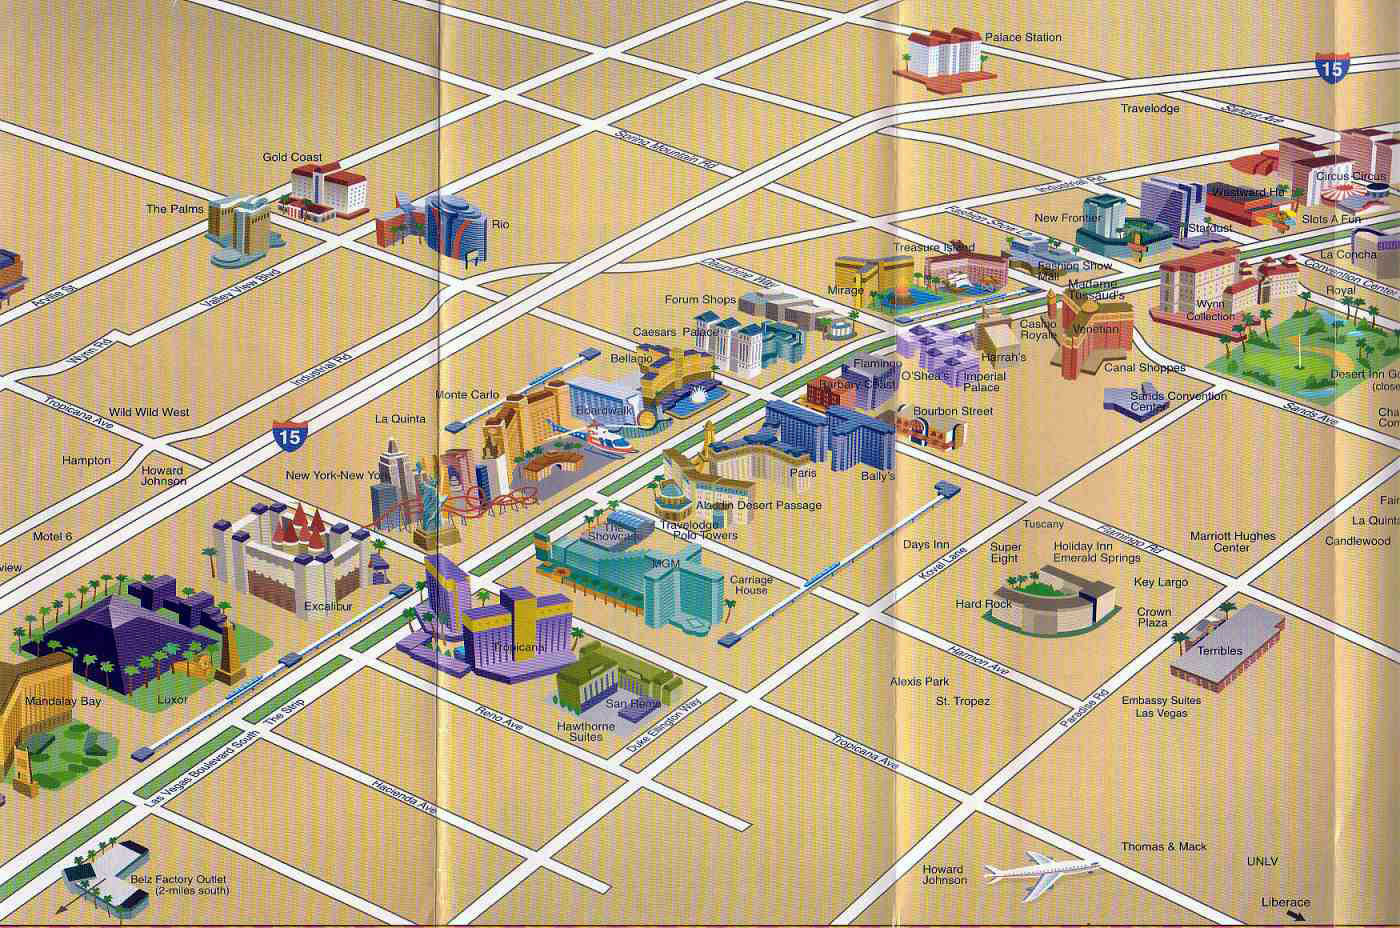 Detailed map of casinos and hotels of Las Vegas city Las Vegas